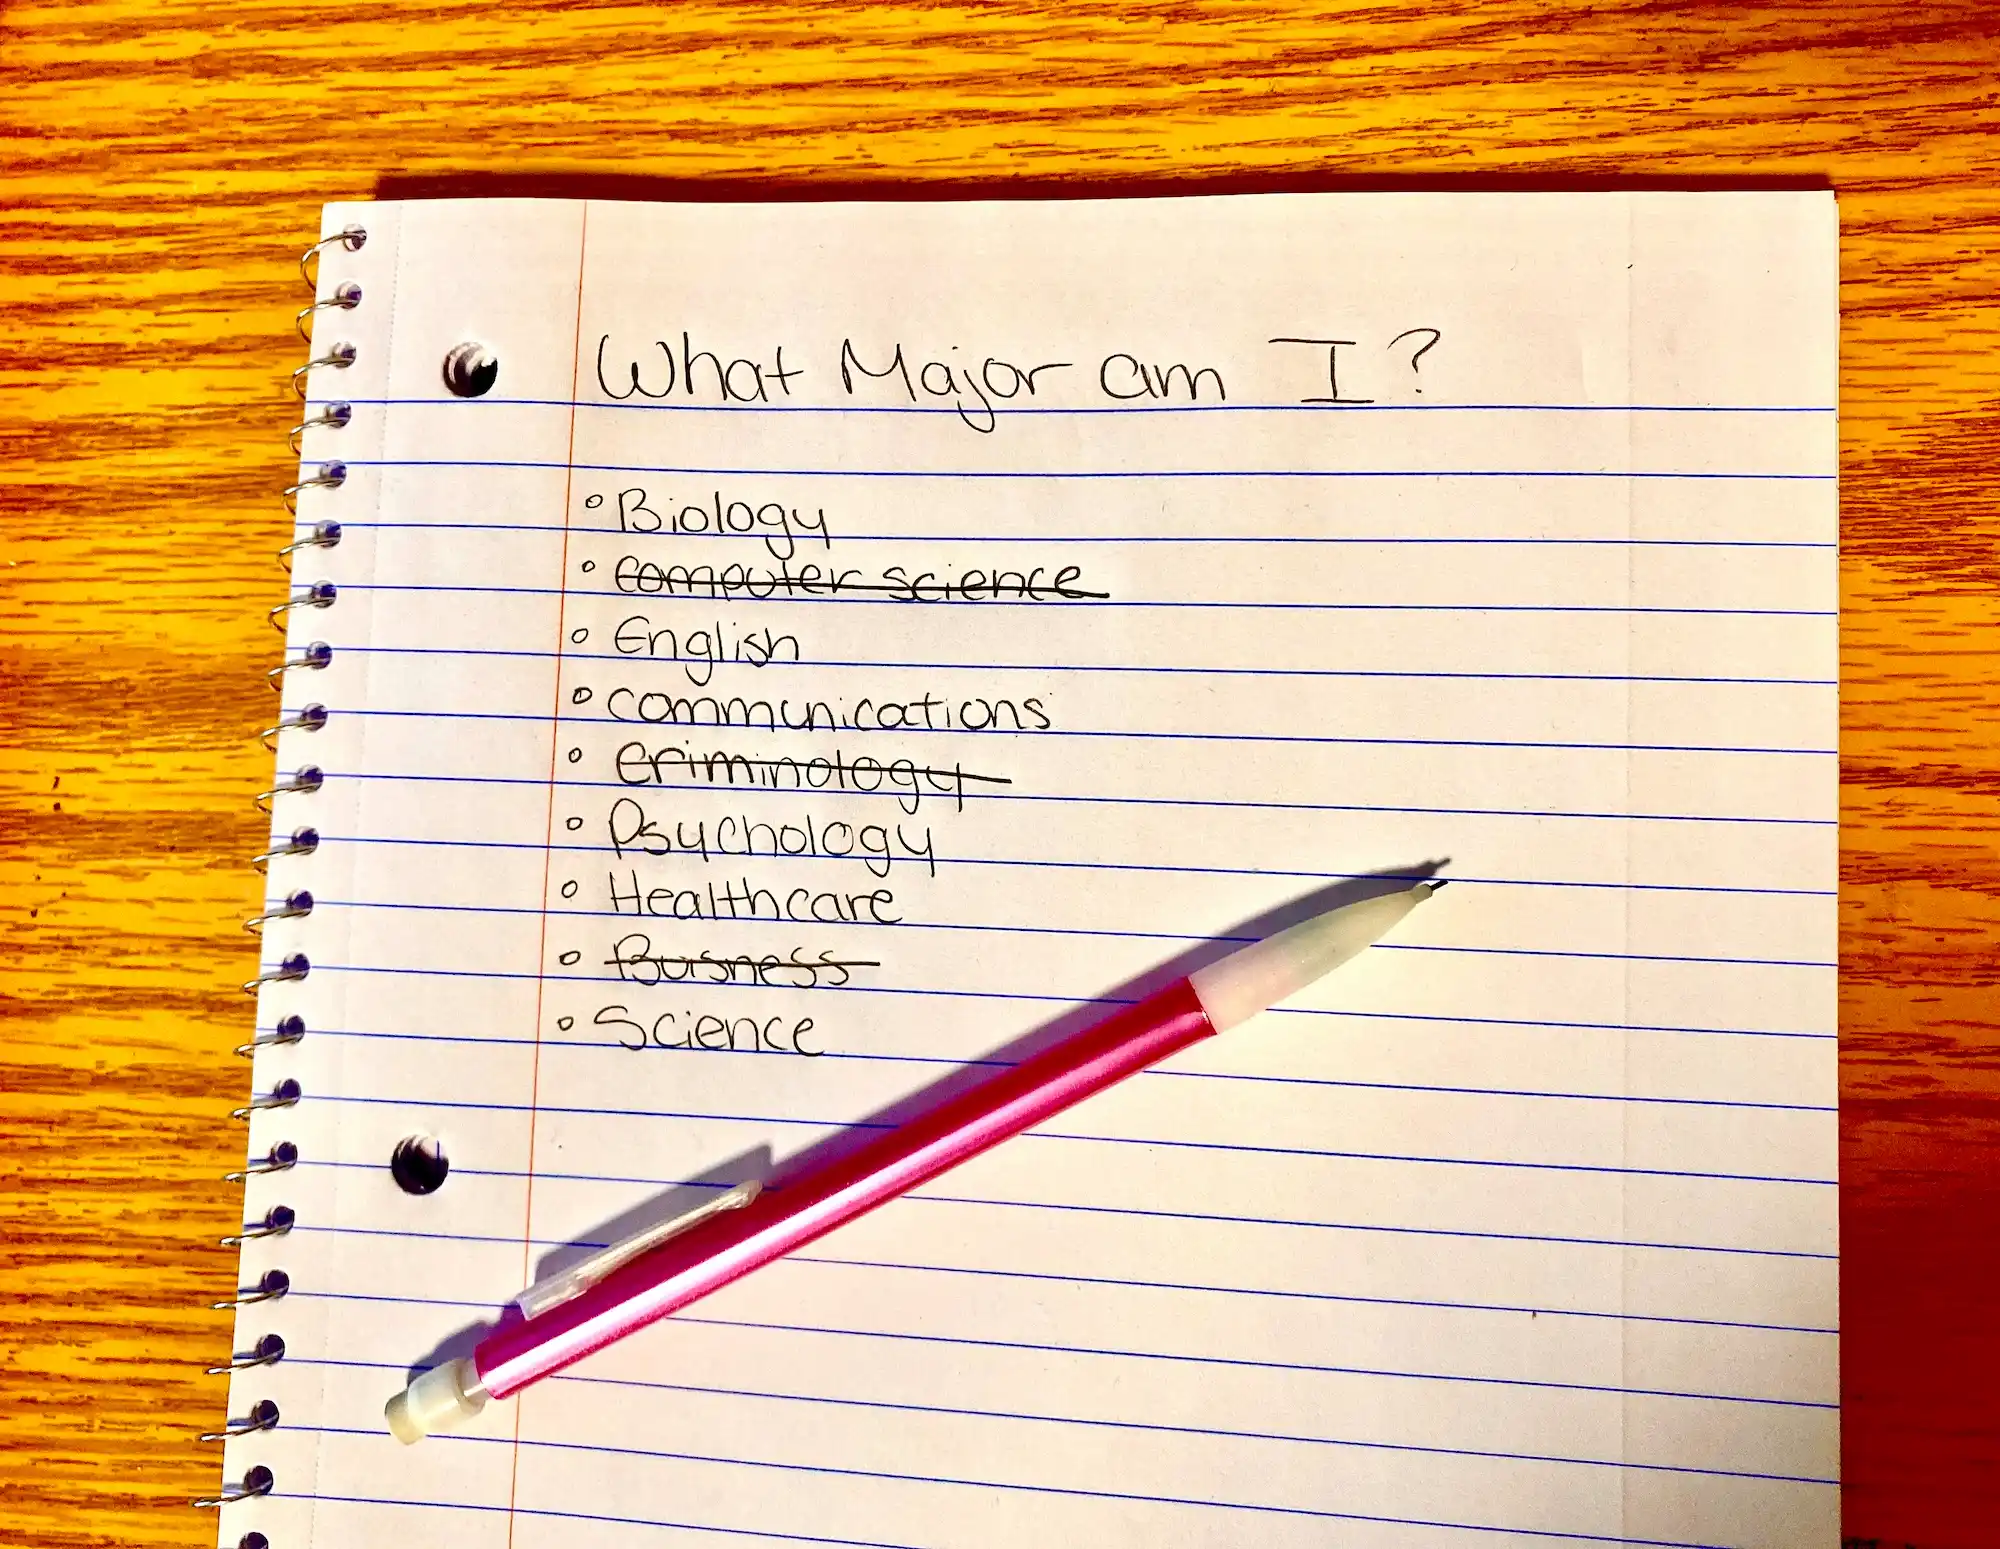 A page in a notebook that contains a list titled "What Major Am I?"